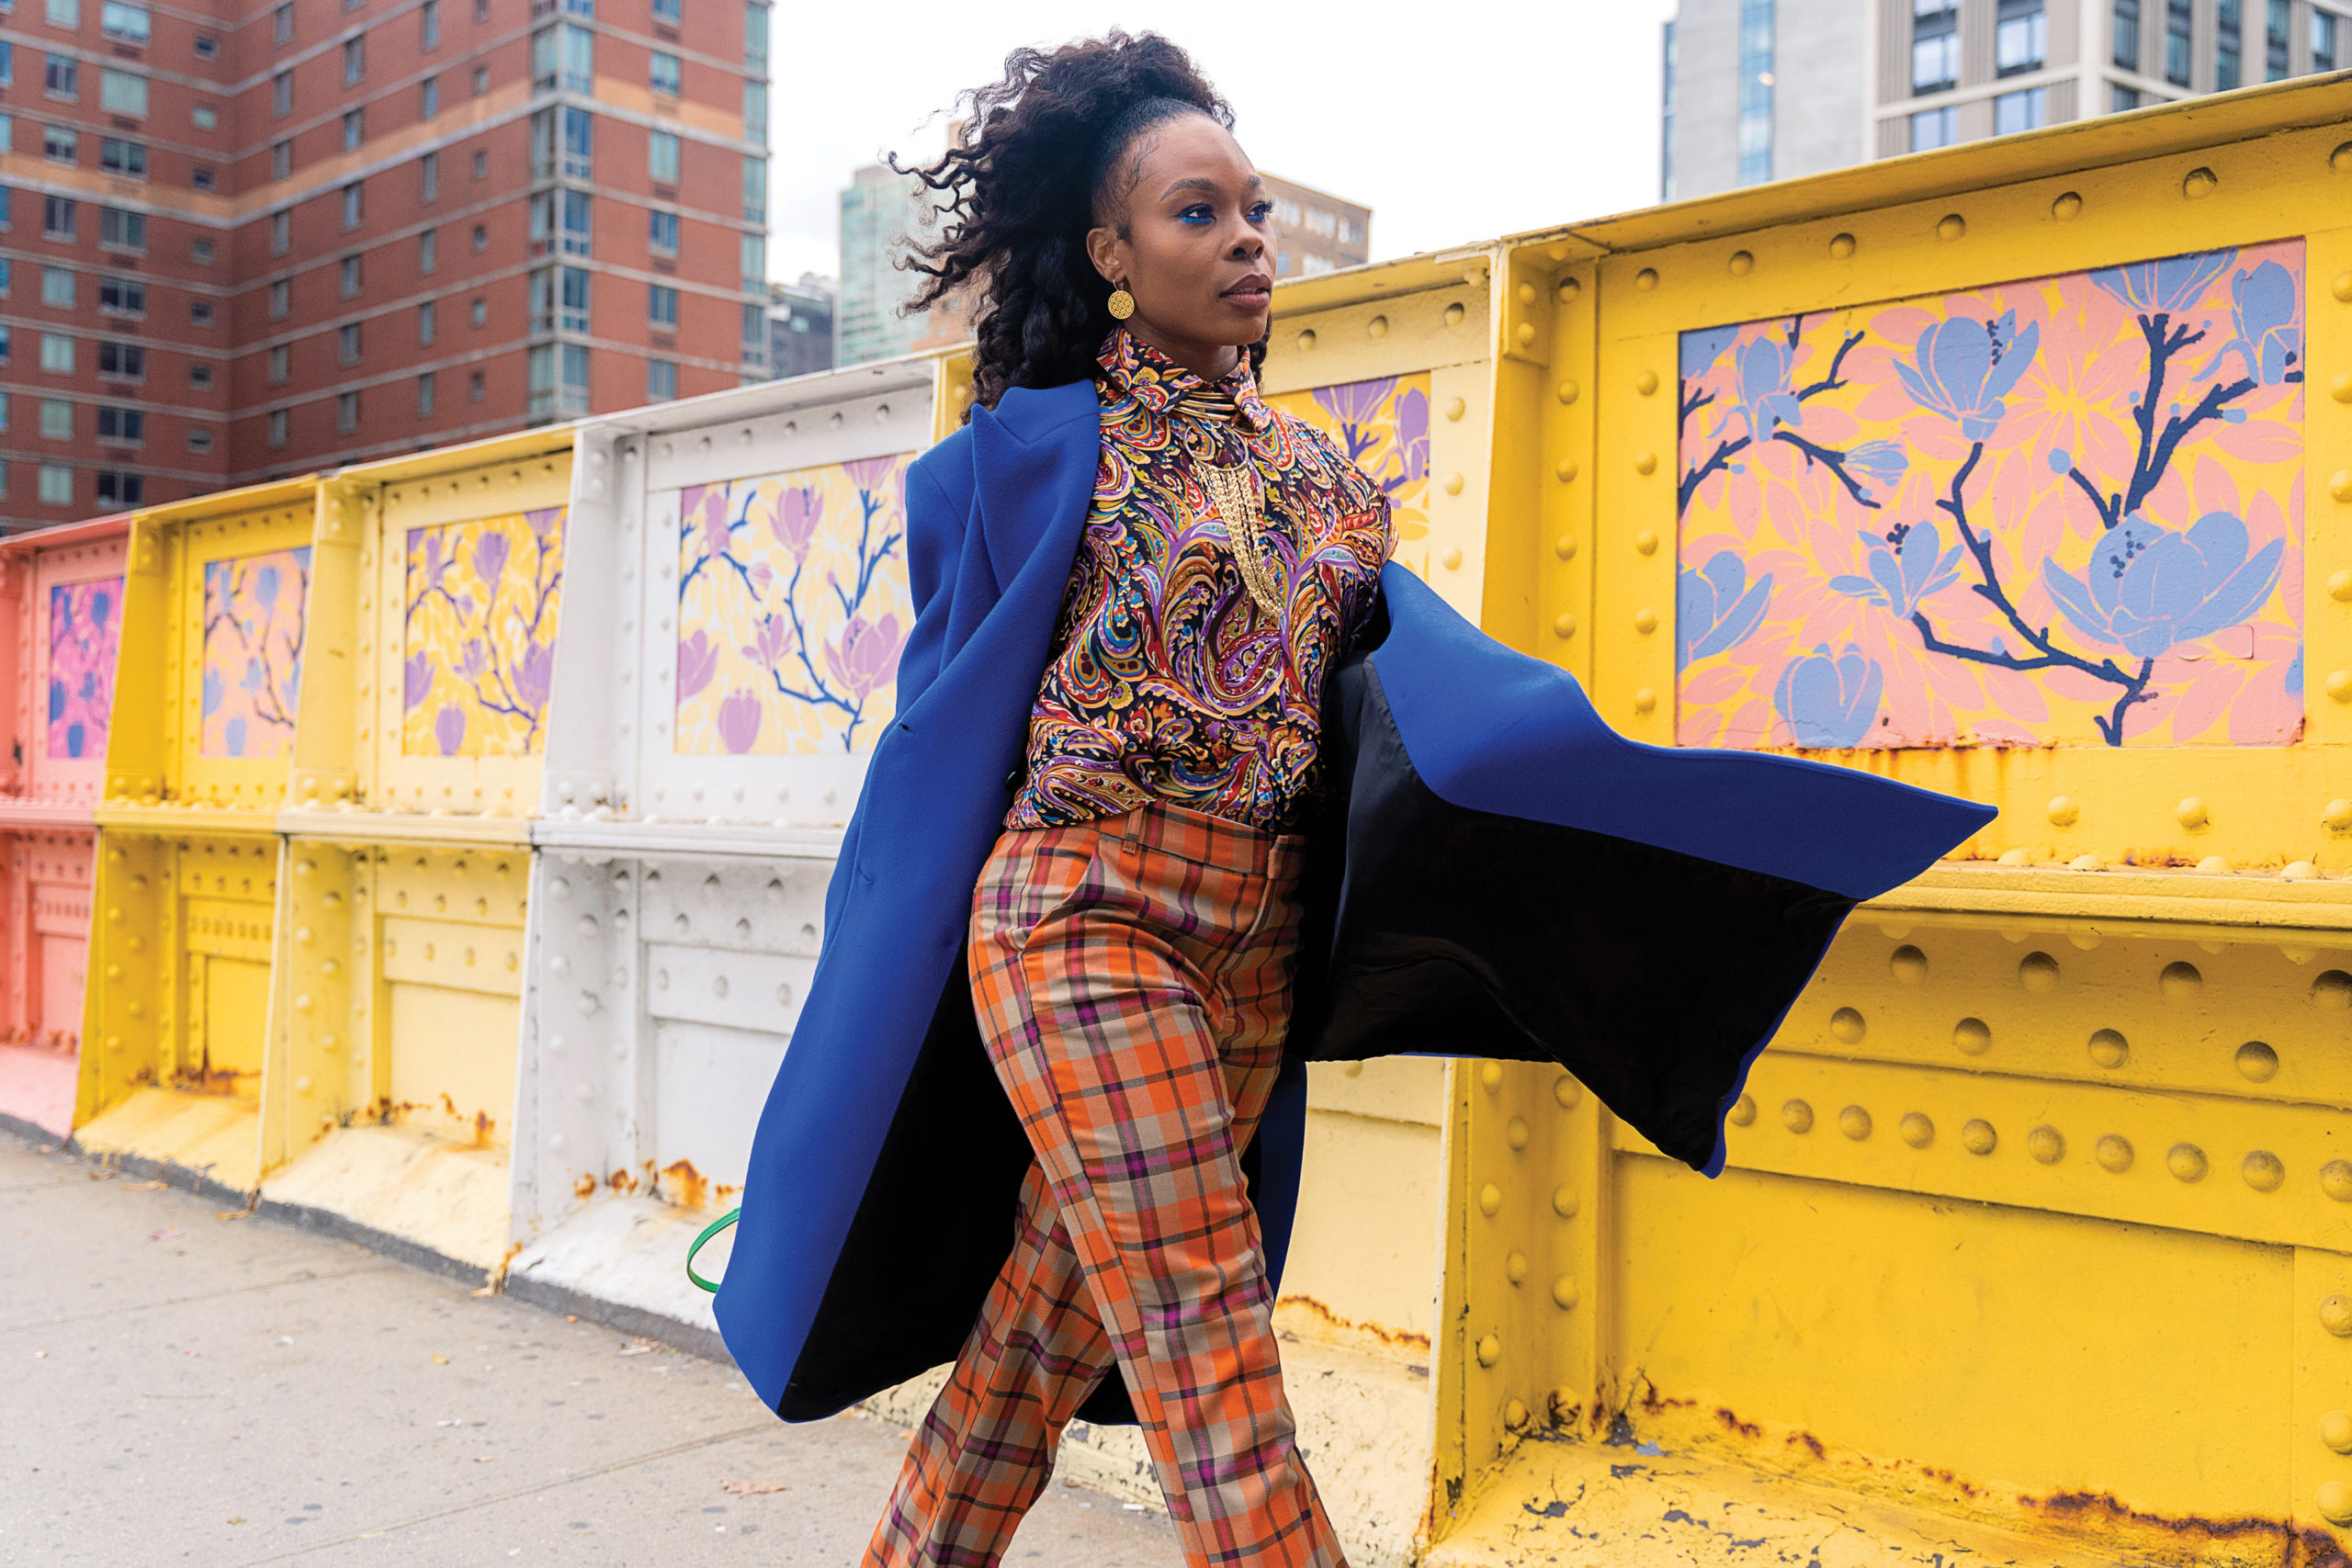 Ebony Williams walks confidently down a city street, blue coat flapping in the wind in from of a yellow structure